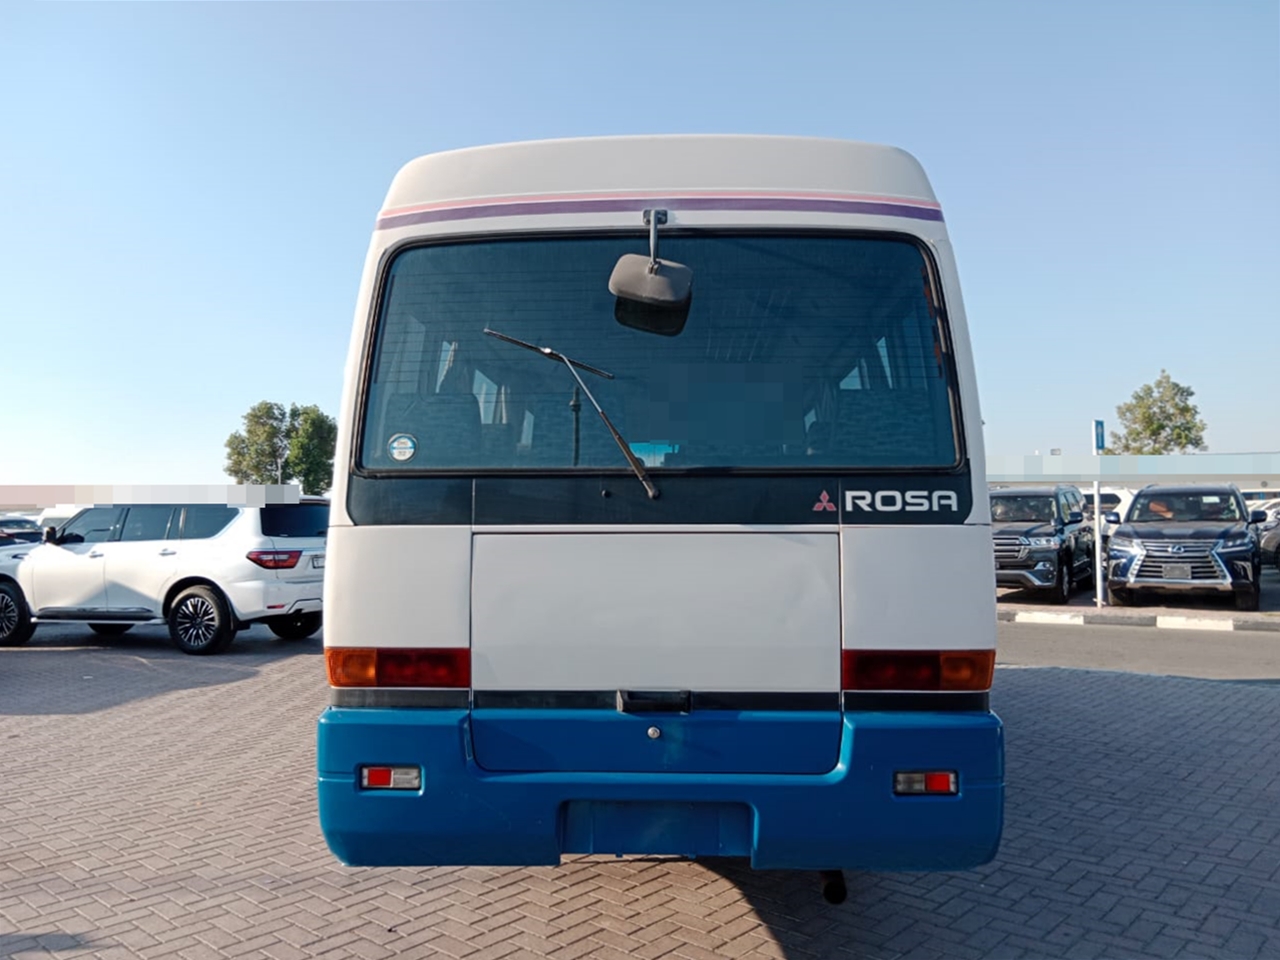 0416 MITSUBISHI ROSA BUS 4.2 2WD A/T OTHER